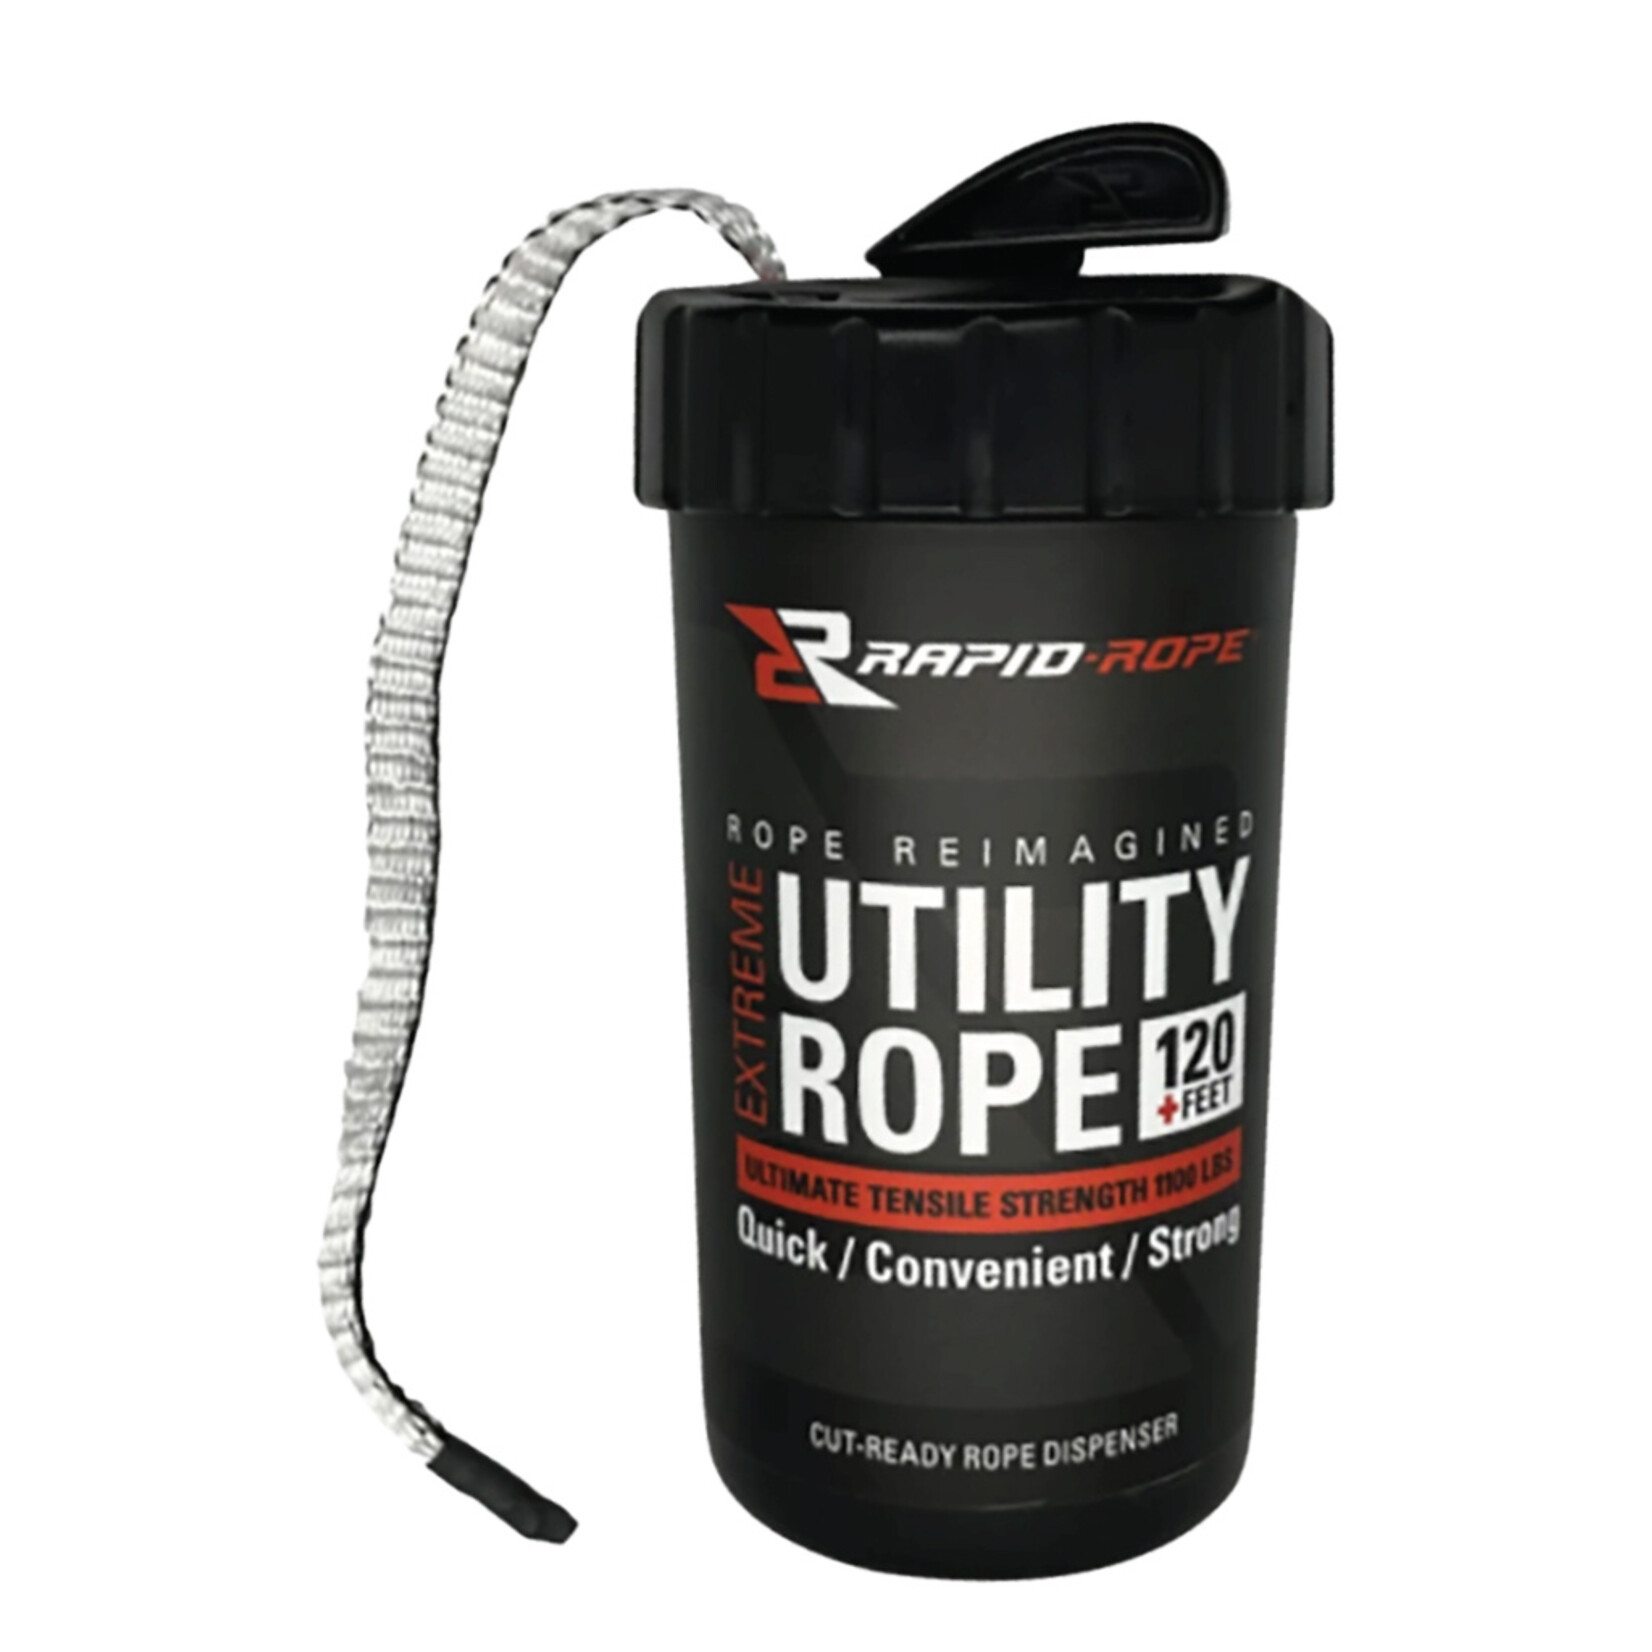 Rapid-Rope Rope Canister 120' White